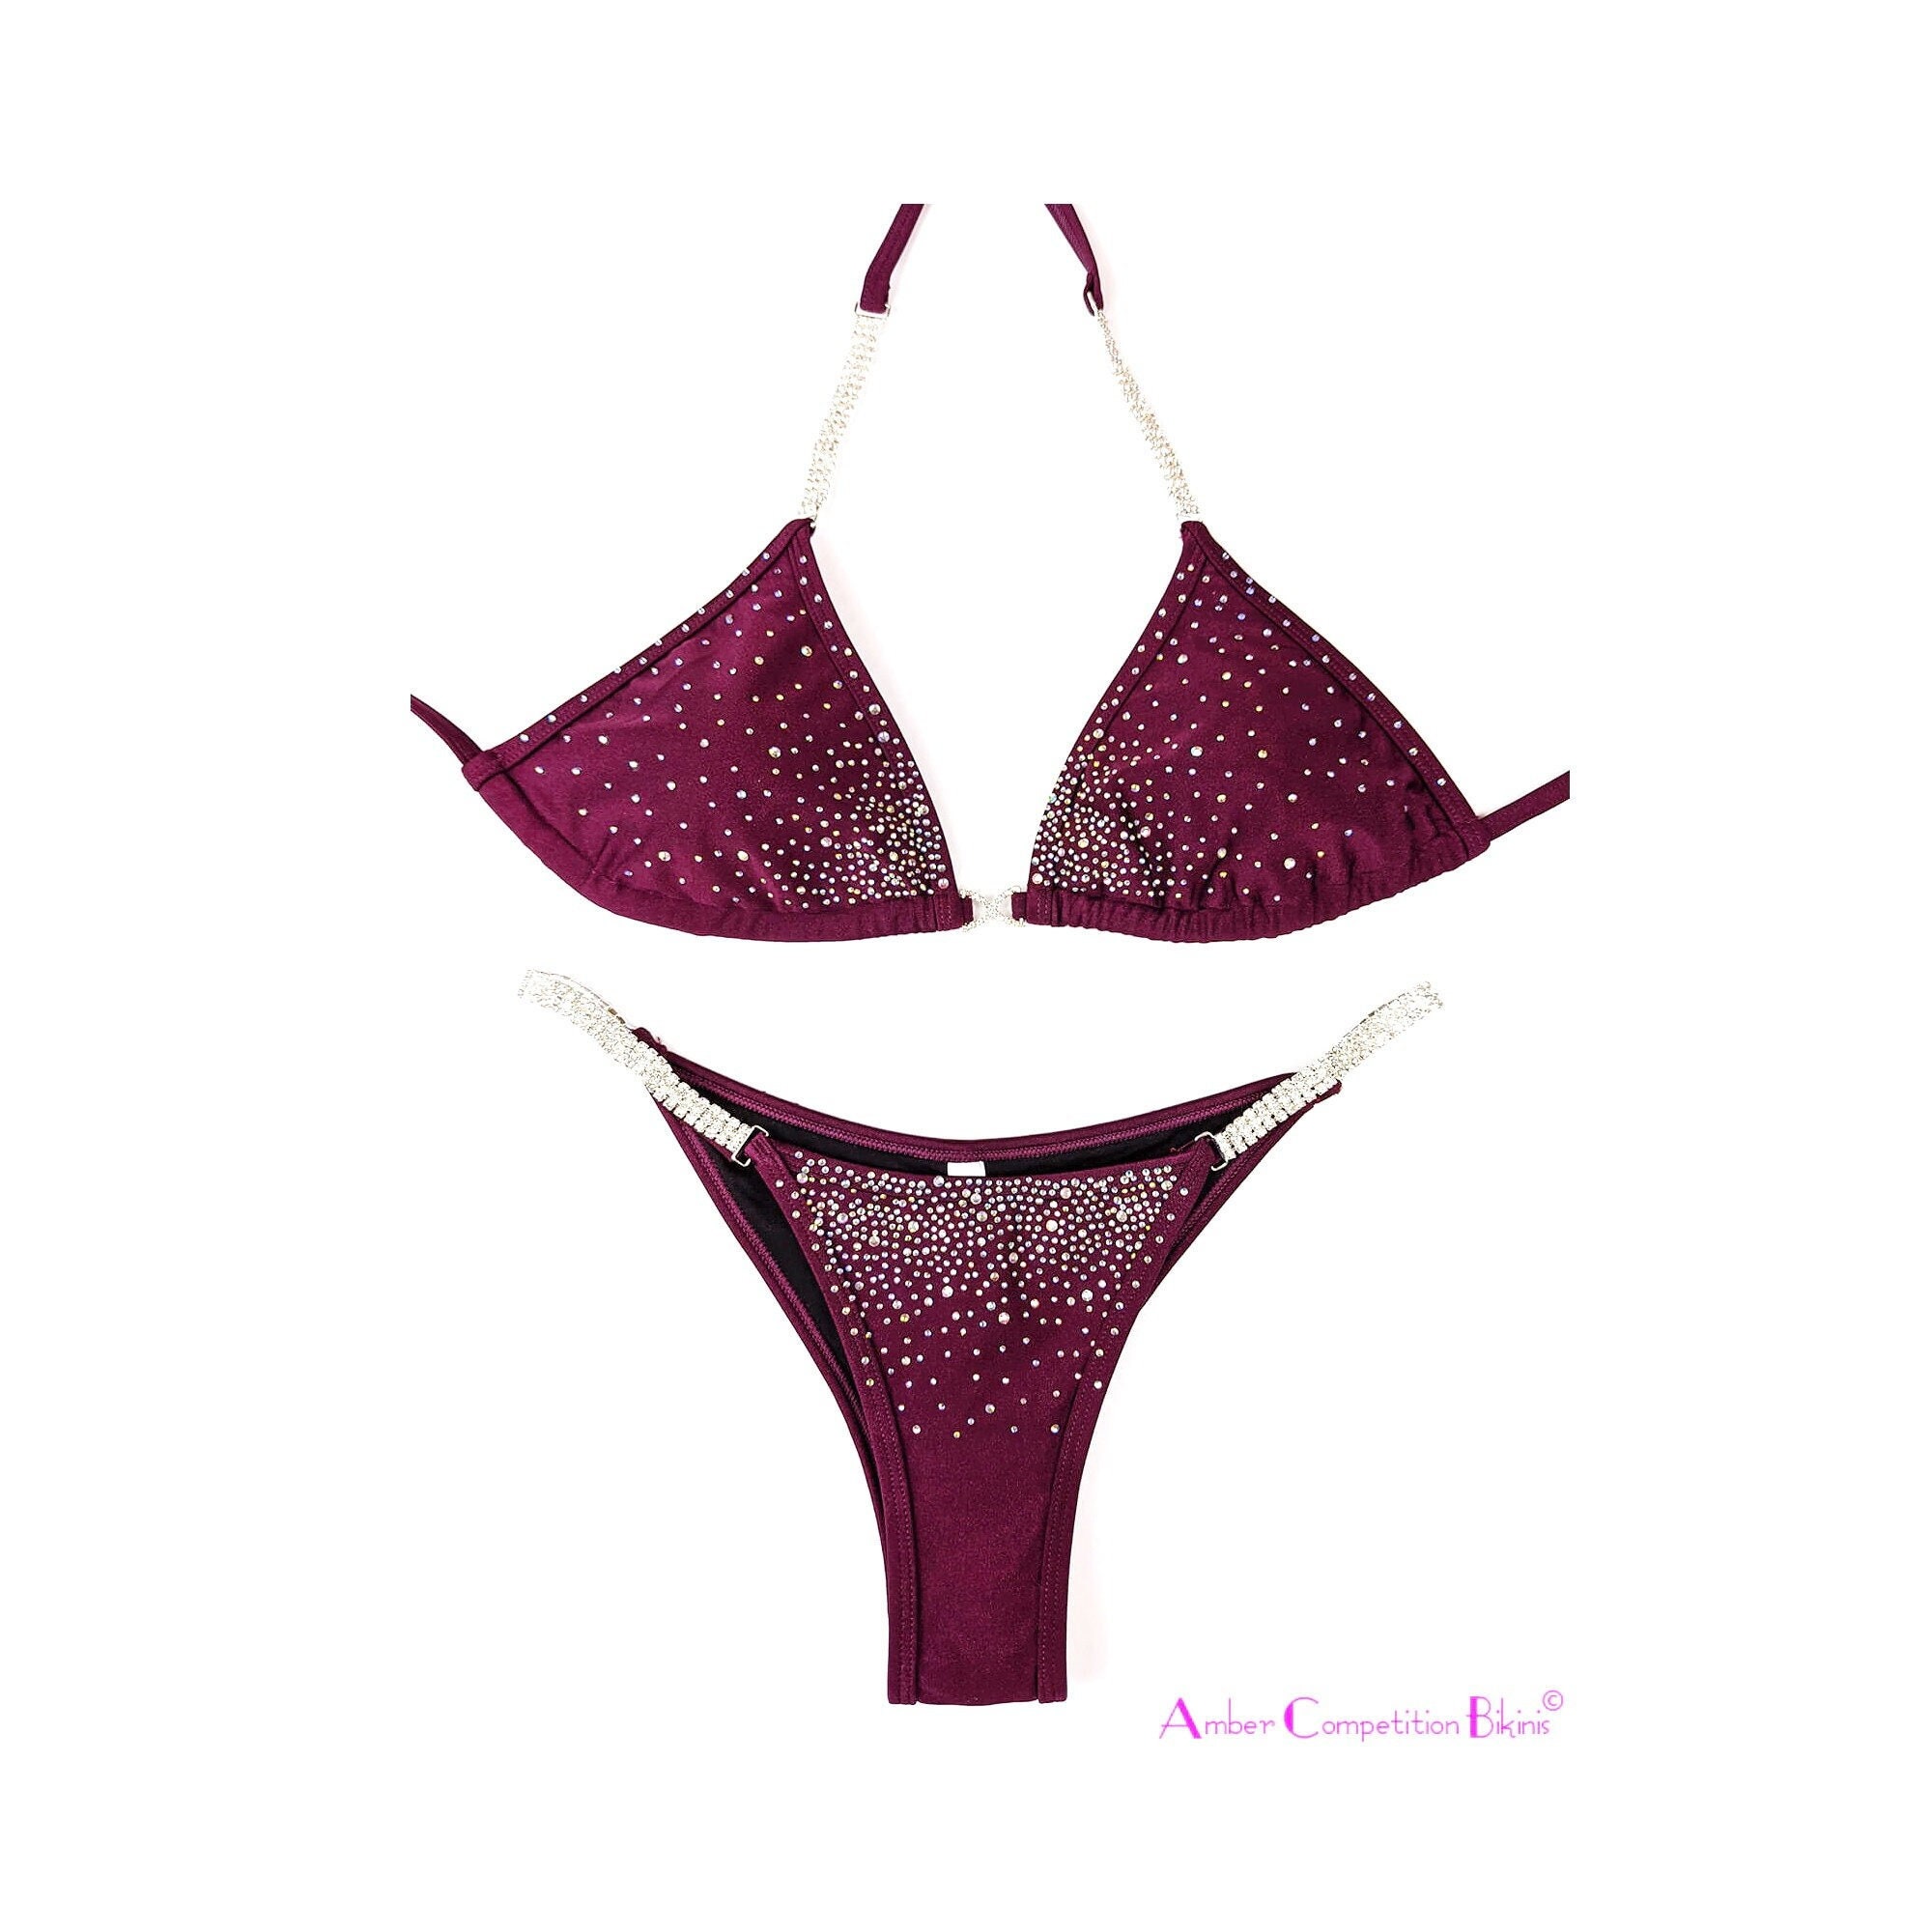 Absolutely Nothing Bikini Set No Cup Open Shown in Purple Other Colors  Available 